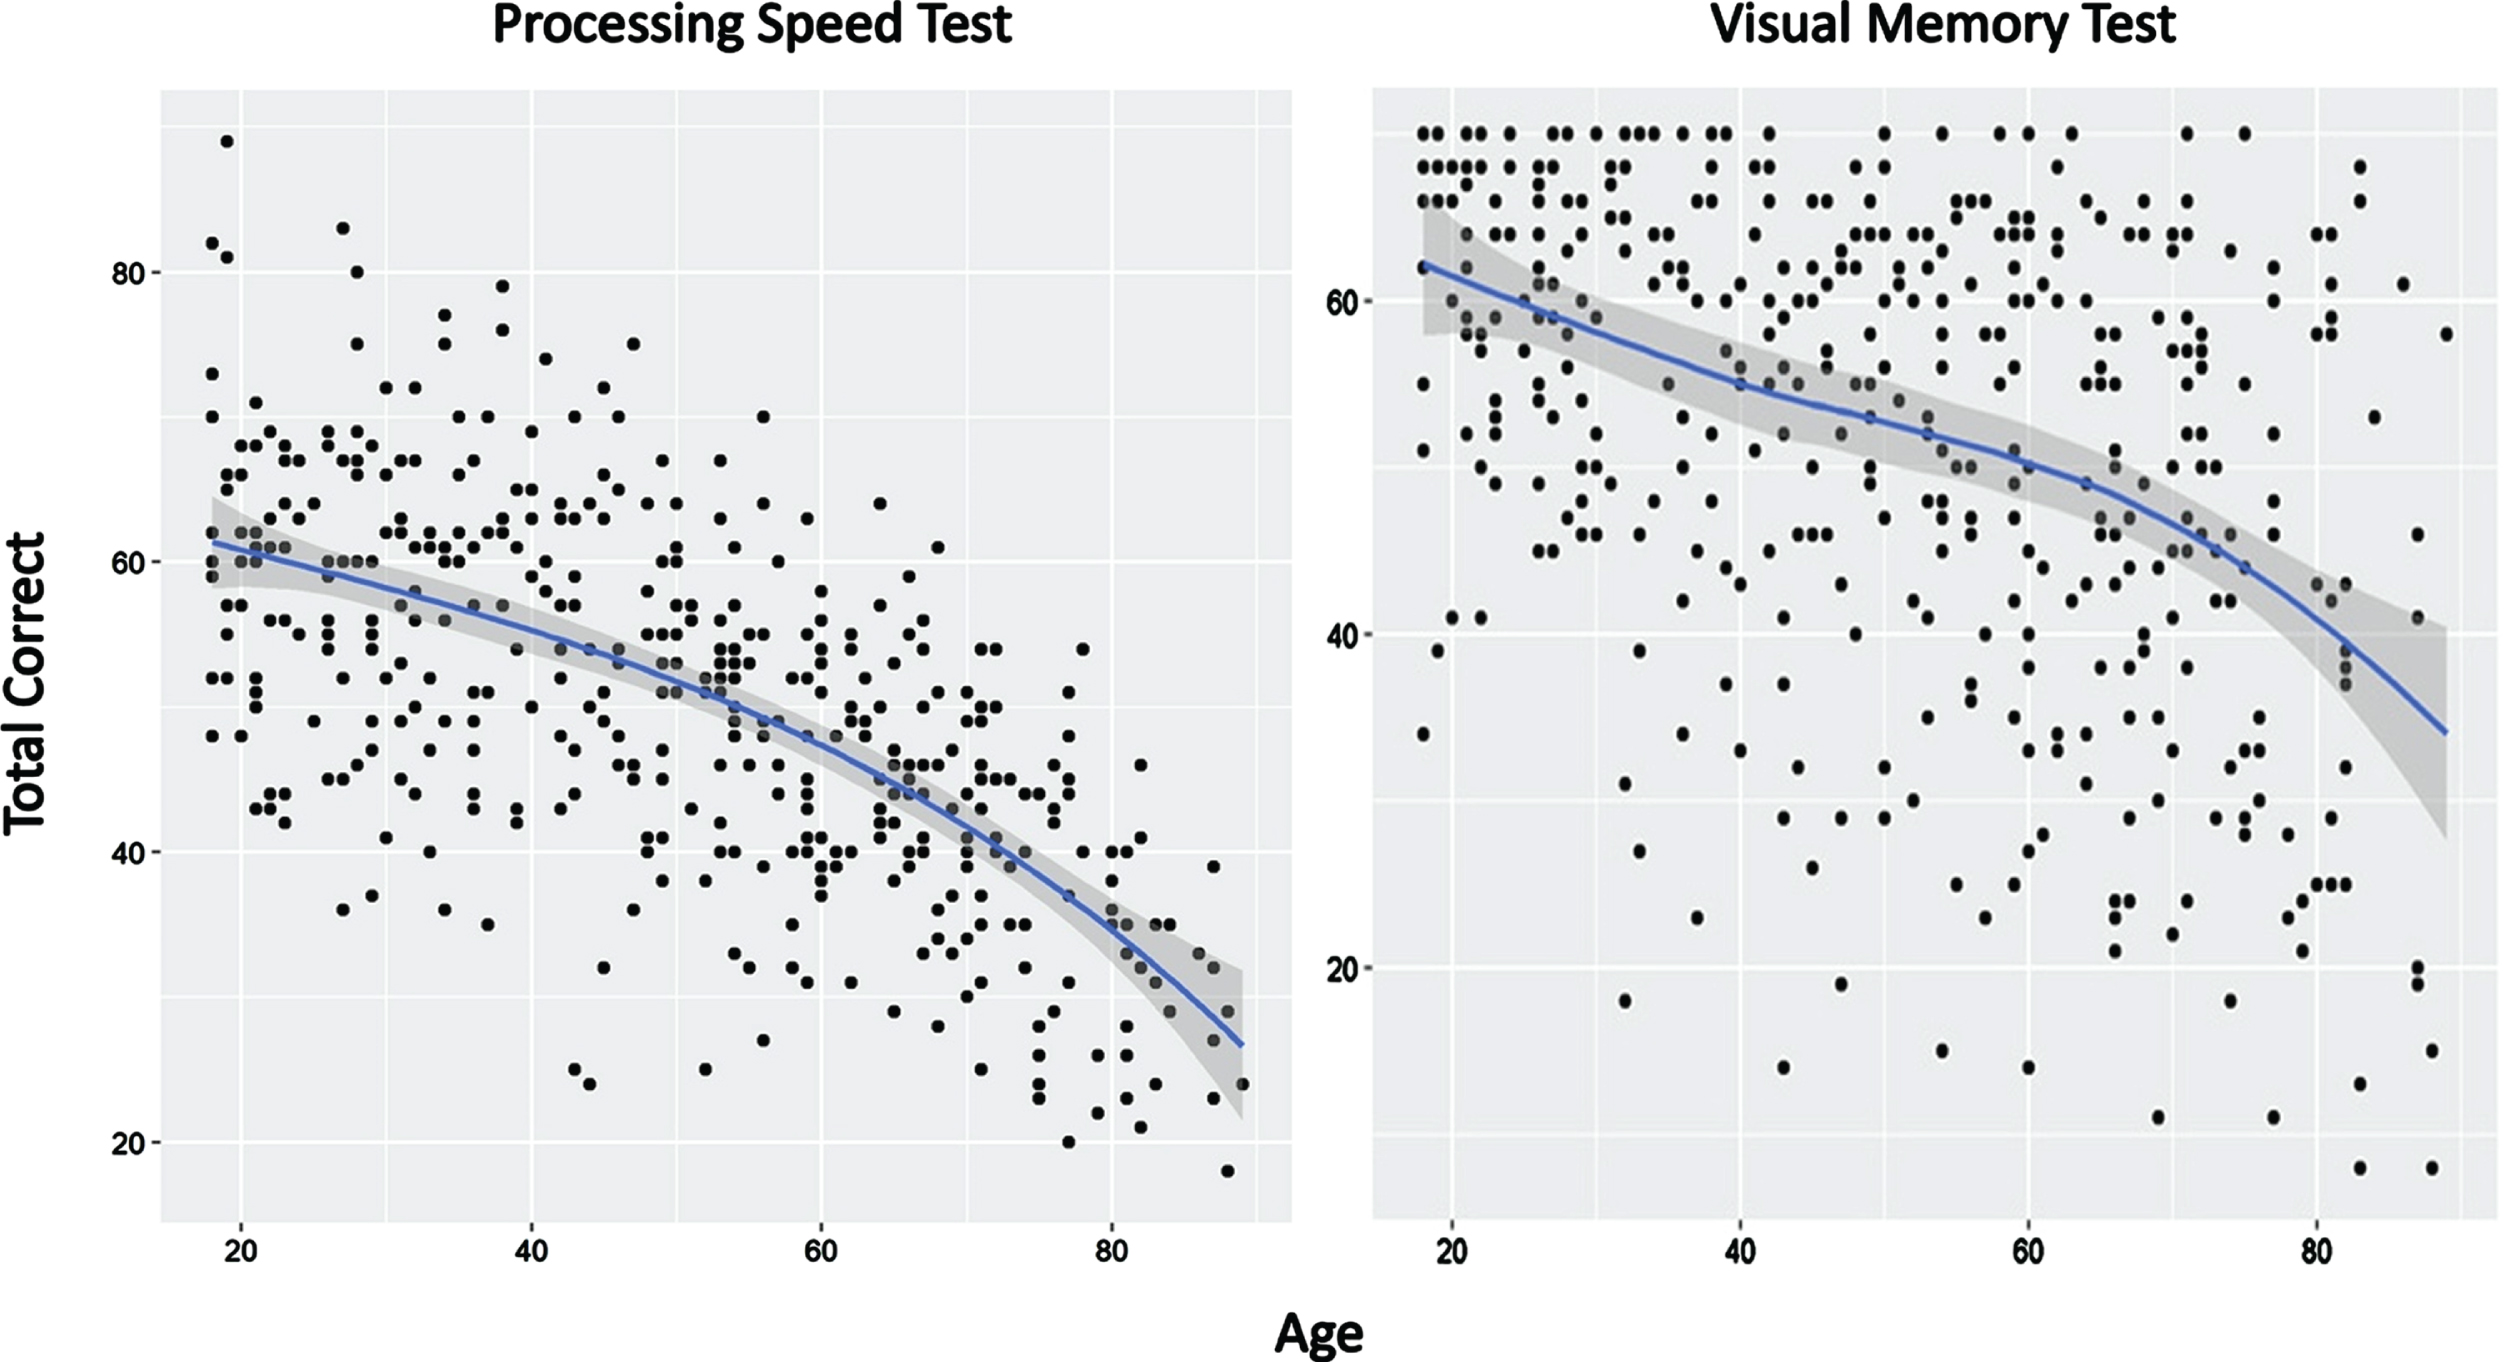 Effects of age on performance of the Processing Speed Test and Visual Memory Test. Blue line reflects best fit of the data (see text for details).